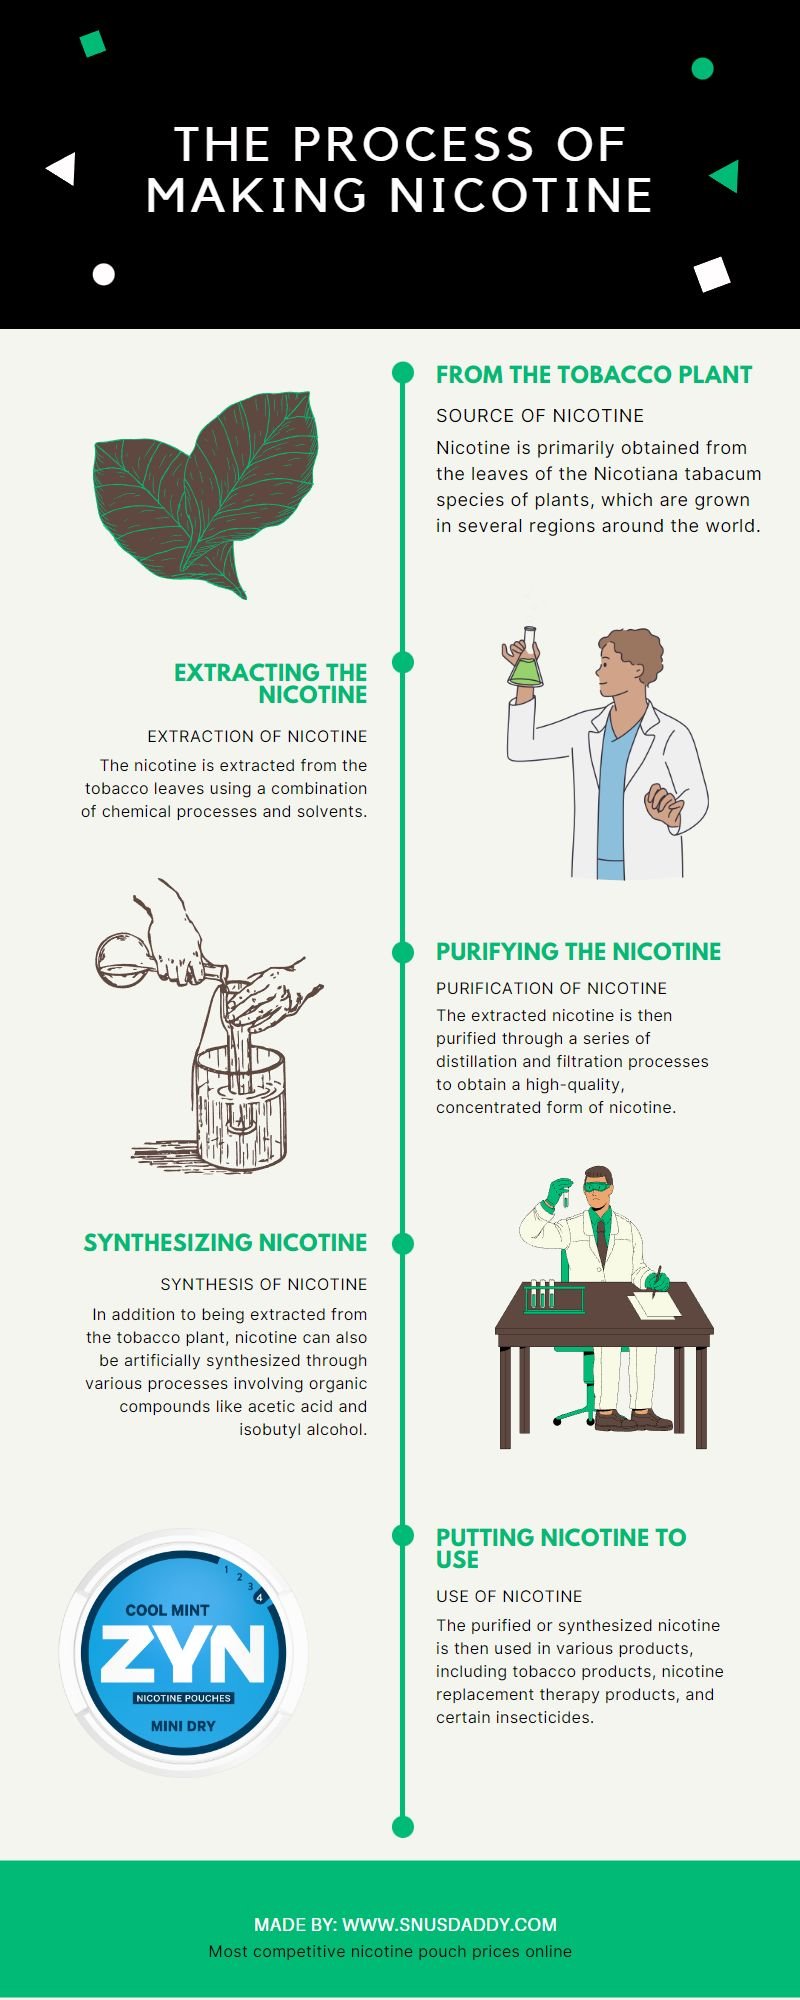 The process of making nicotine infographic